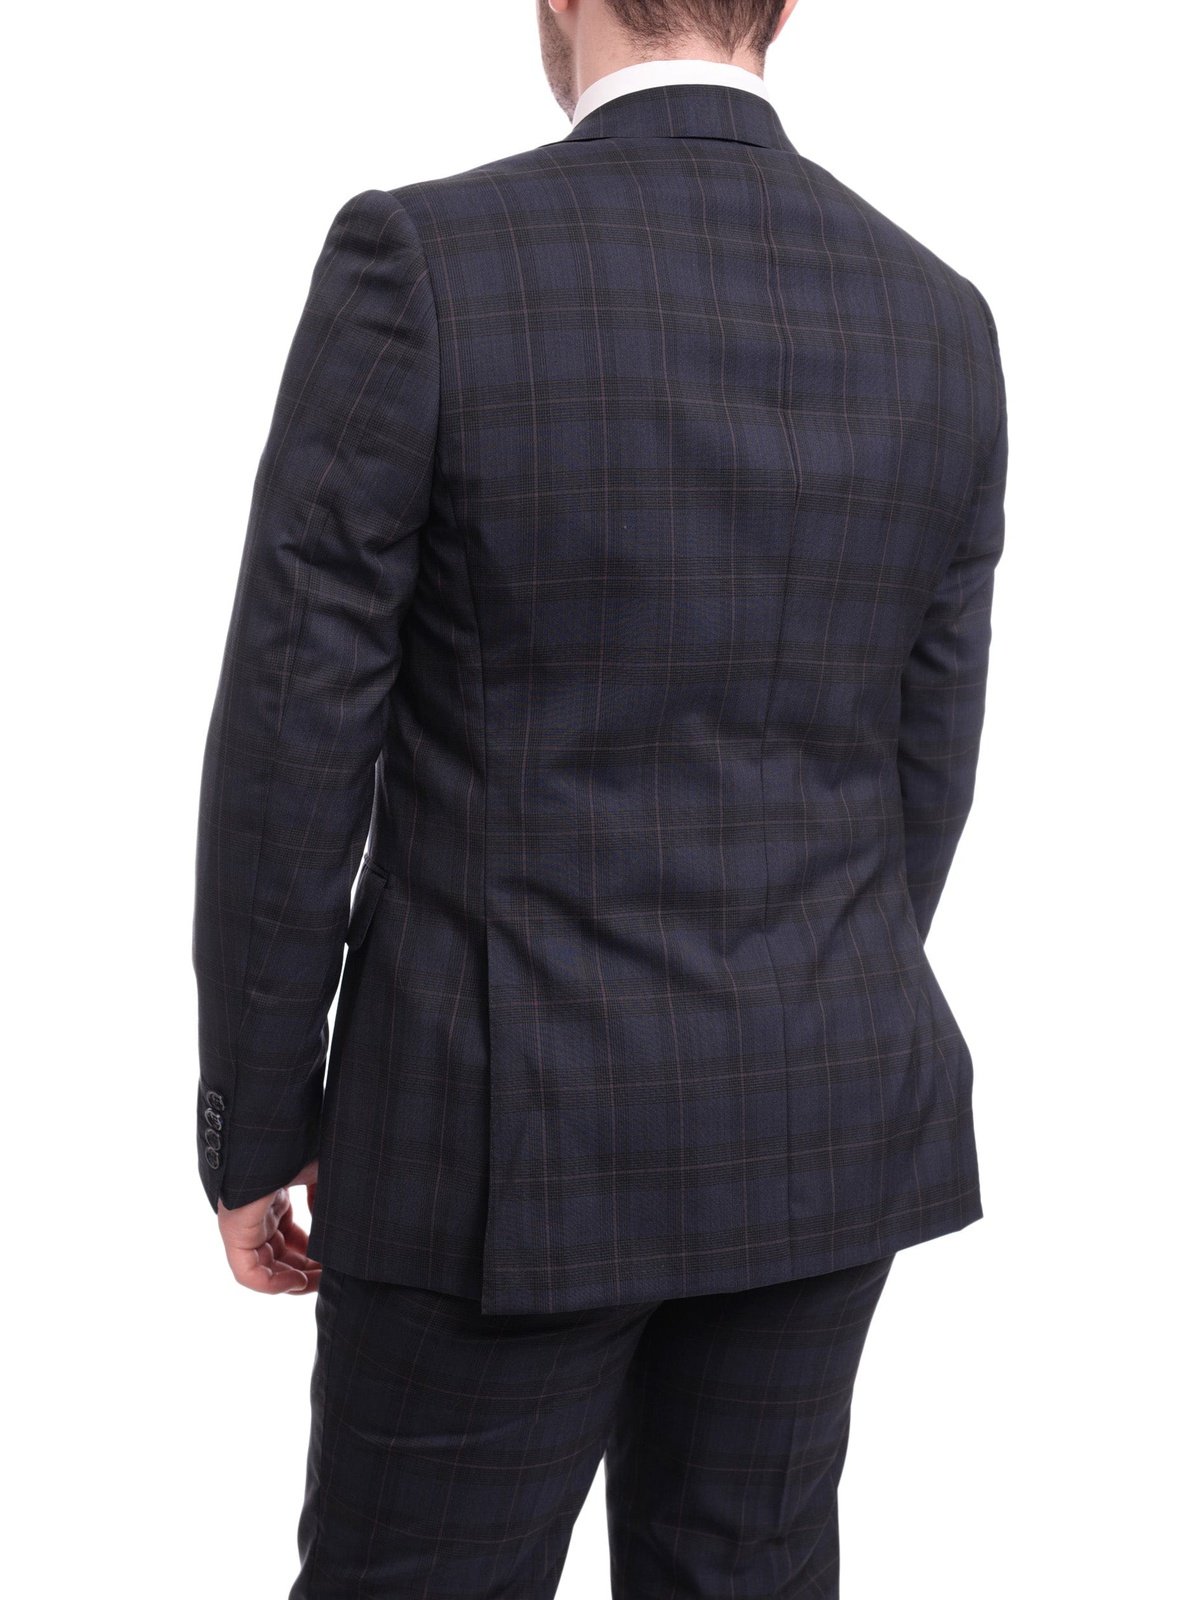 Napoli TWO PIECE SUITS Napoli Slim Fit Navy Blue Plaid With Red Windowpane Half Canvassed Wool Suit